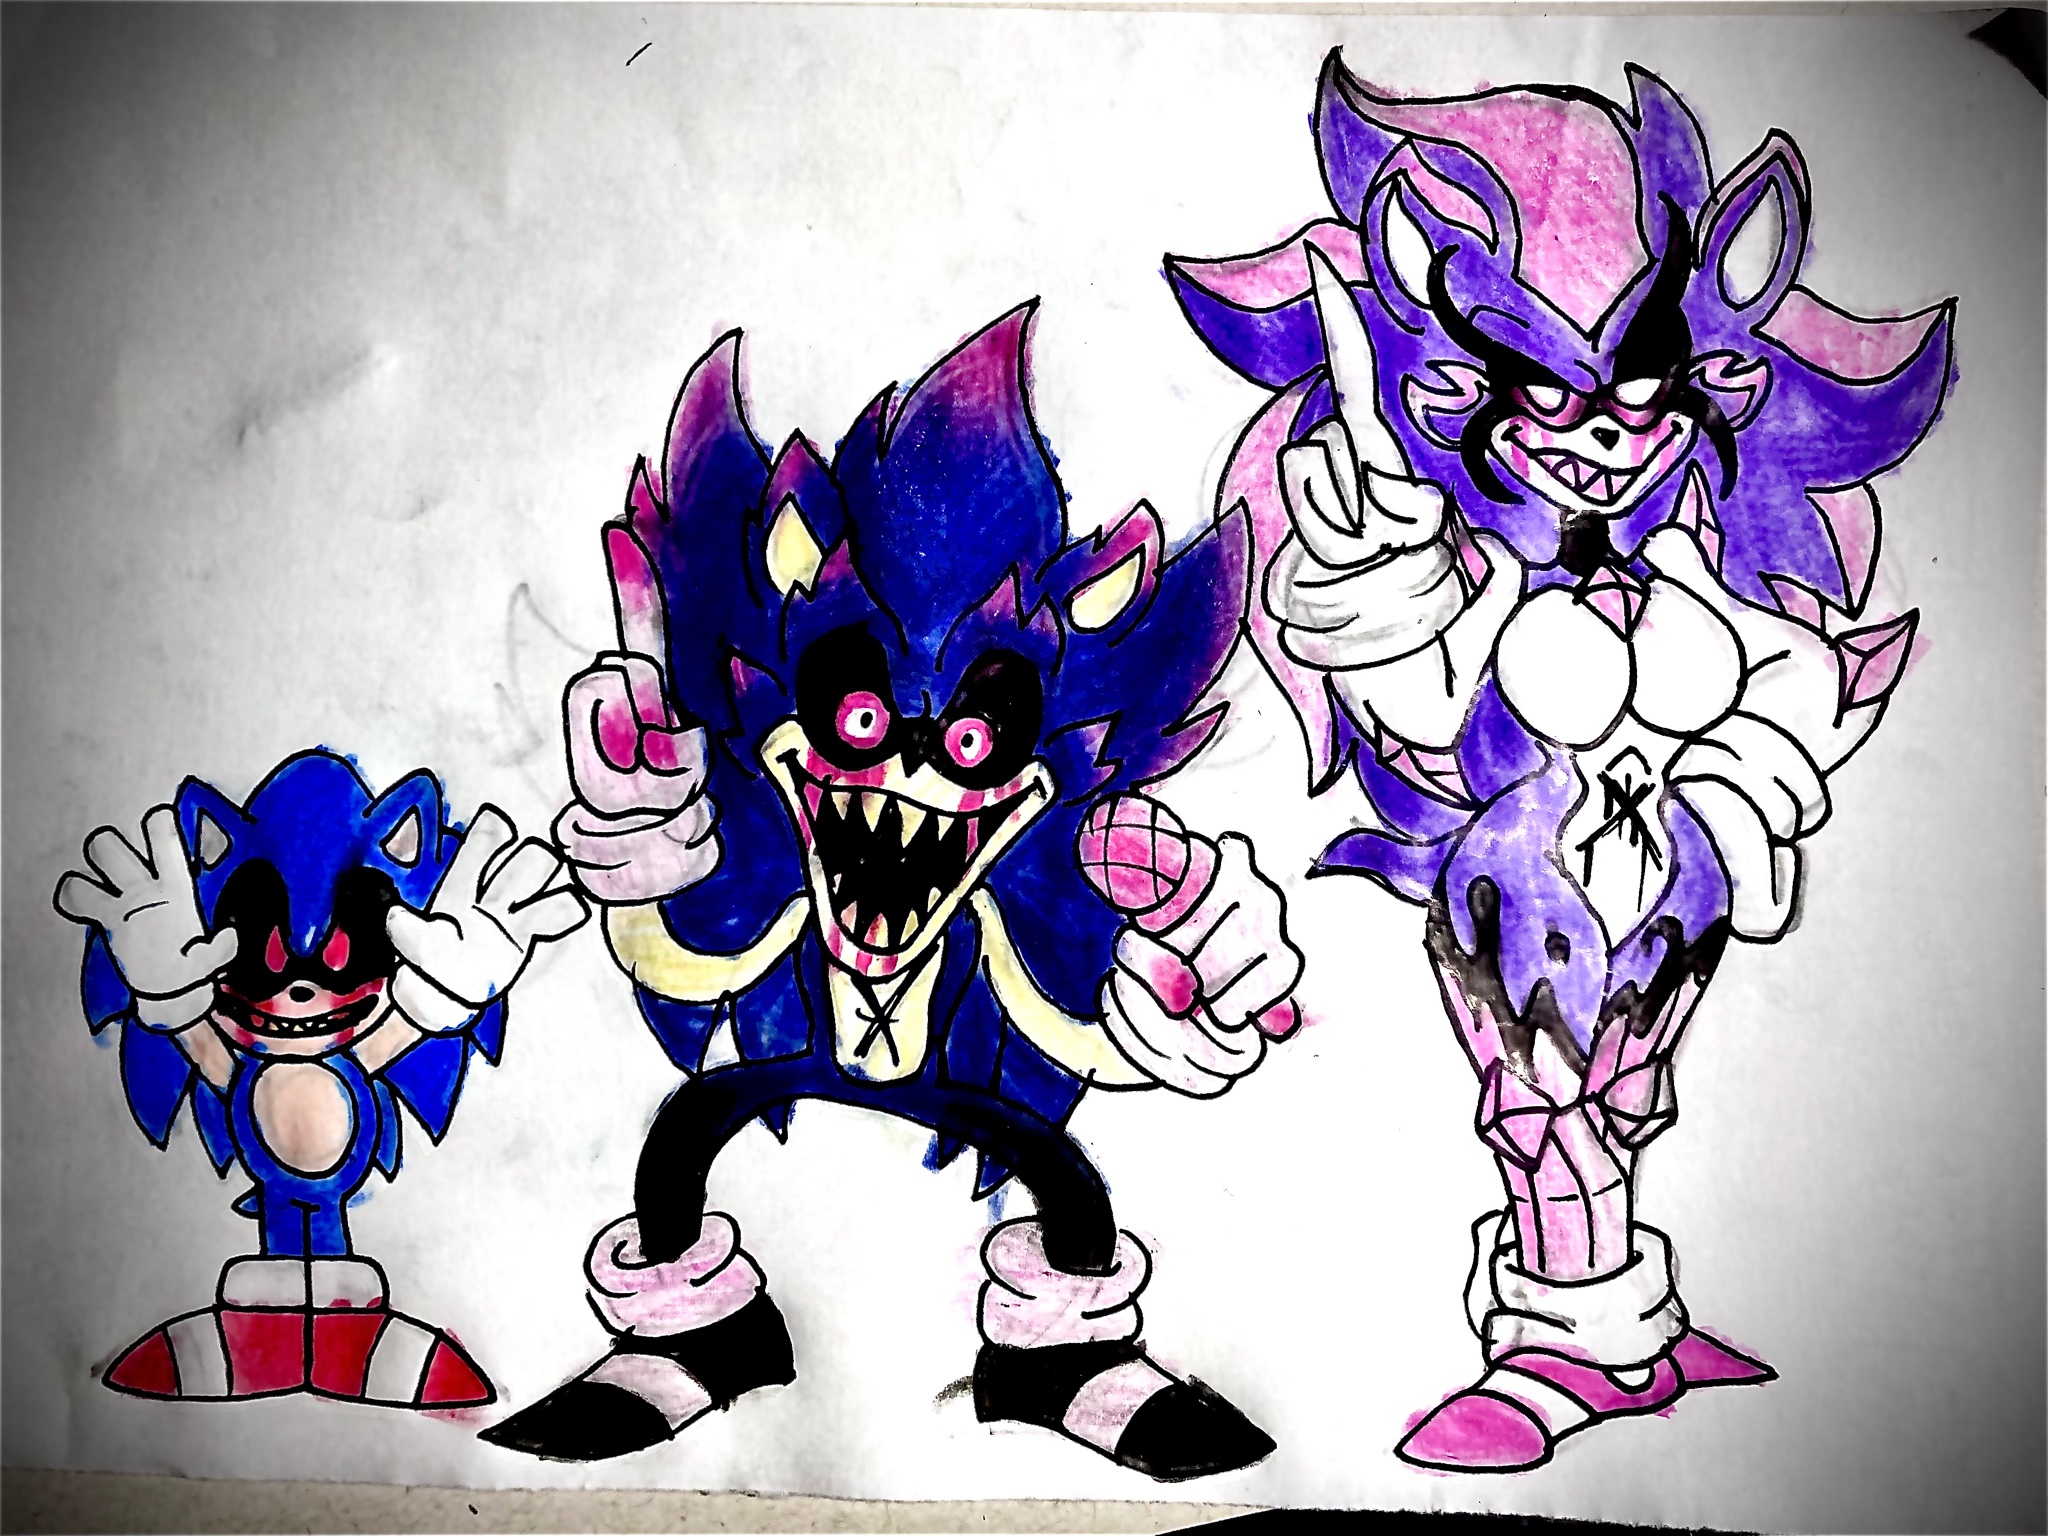 LORD X, FLEETWAY SONIC AND SONIC.EXE MY BELOVEDD on Twitter